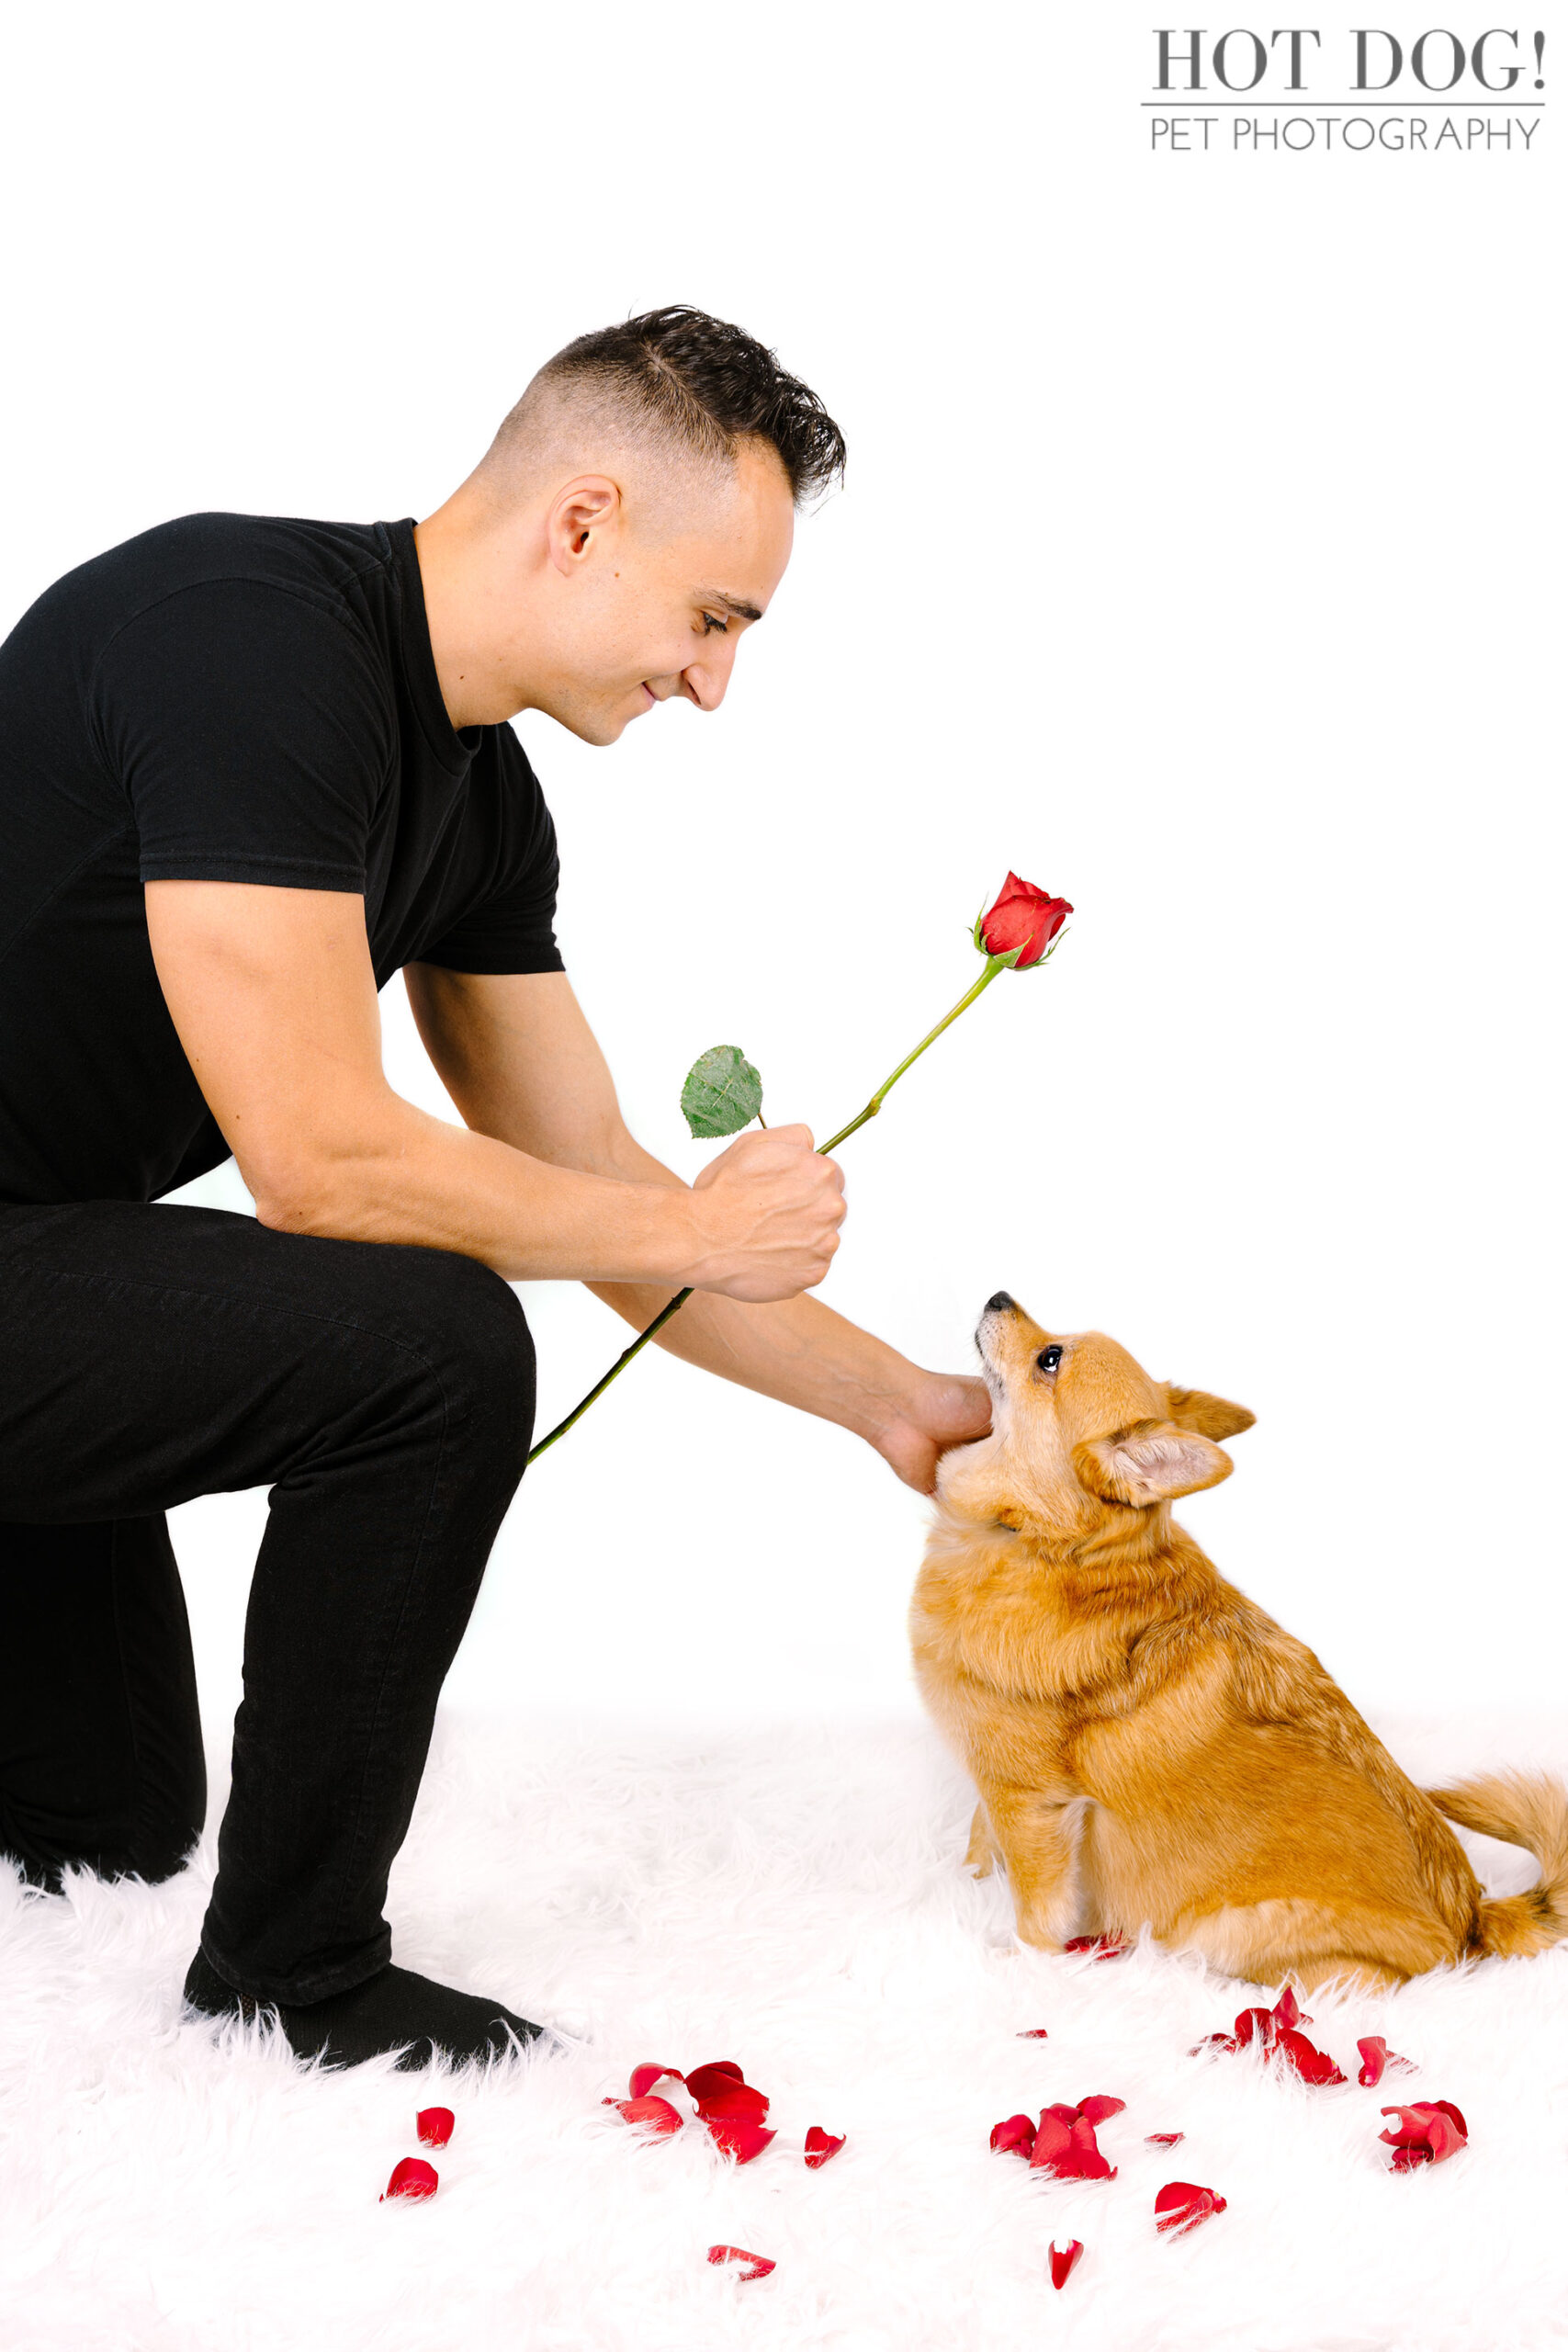 Hot Dog! Pet Photography captures the love and bond between Tinkerbelle the Toy Pomeranian Corgi mix and her owner in this professional pet photo session.